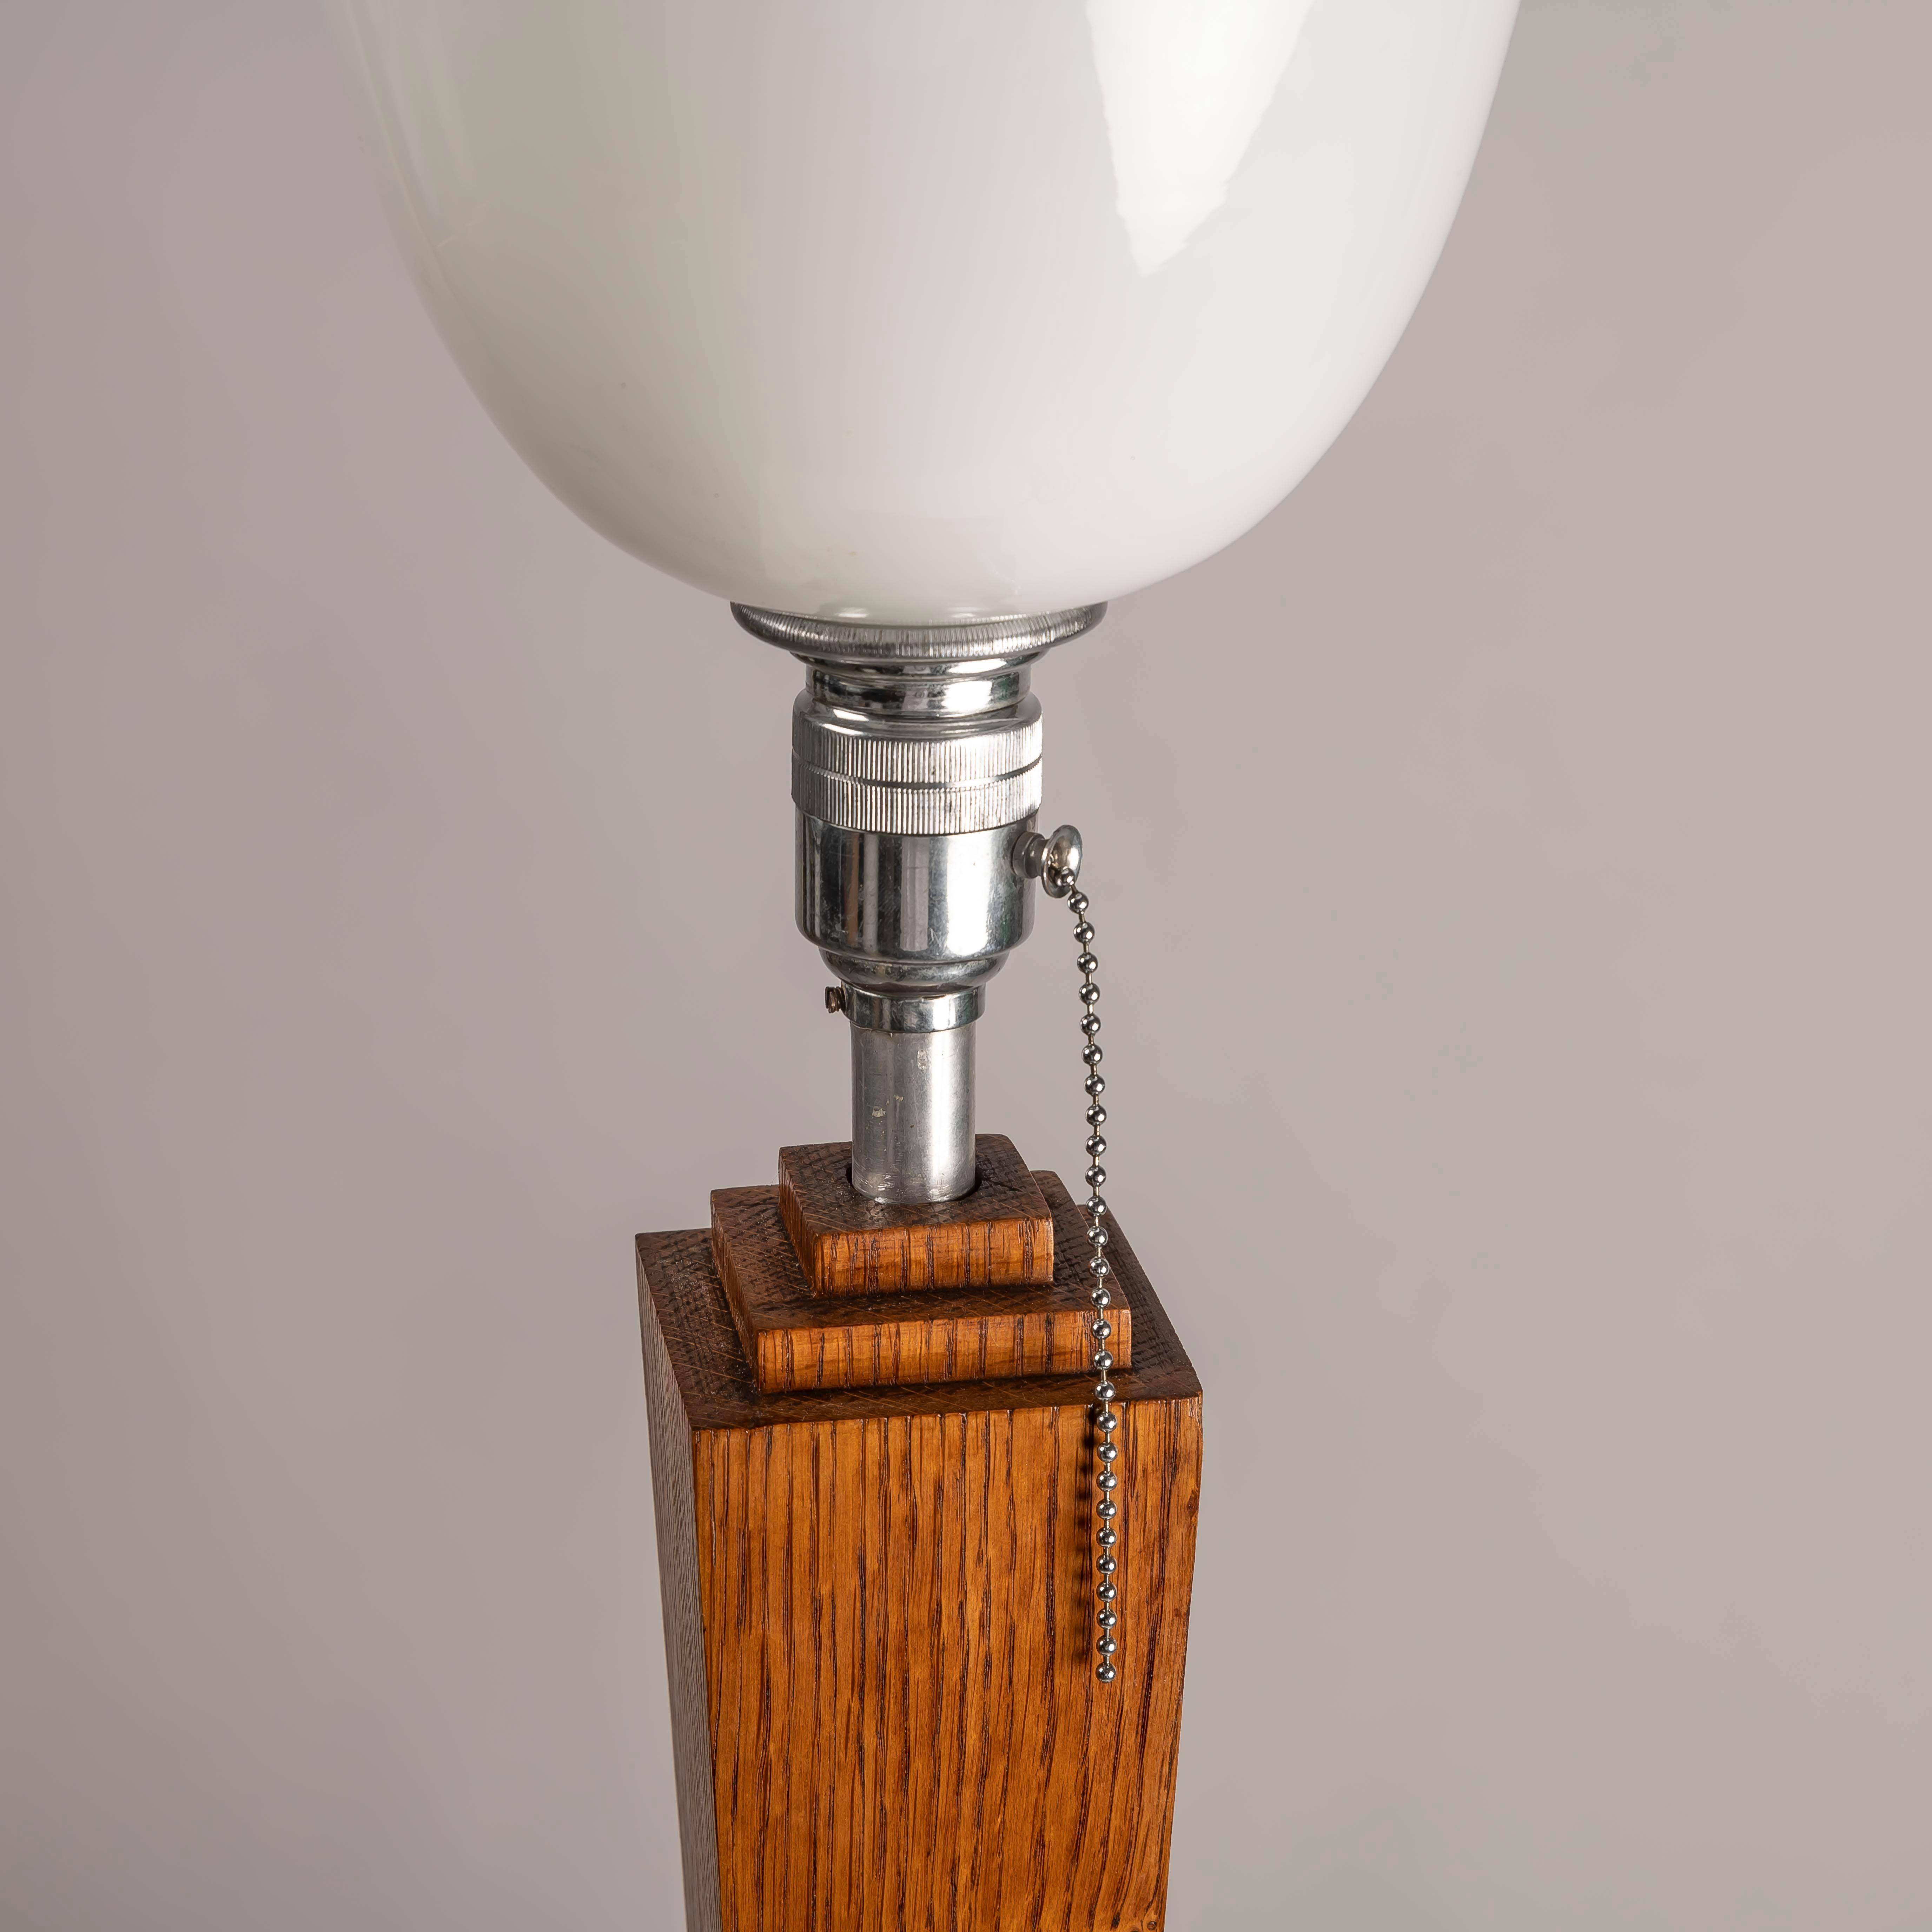 Indulge in the opulent charm of Art Deco with the French XXL table lamp, reminiscent of the exquisite style of Jean-Michel Frank from the 1940s. Crafted with a discerning eye for detail, this lamp exudes the luxurious allure and timeless